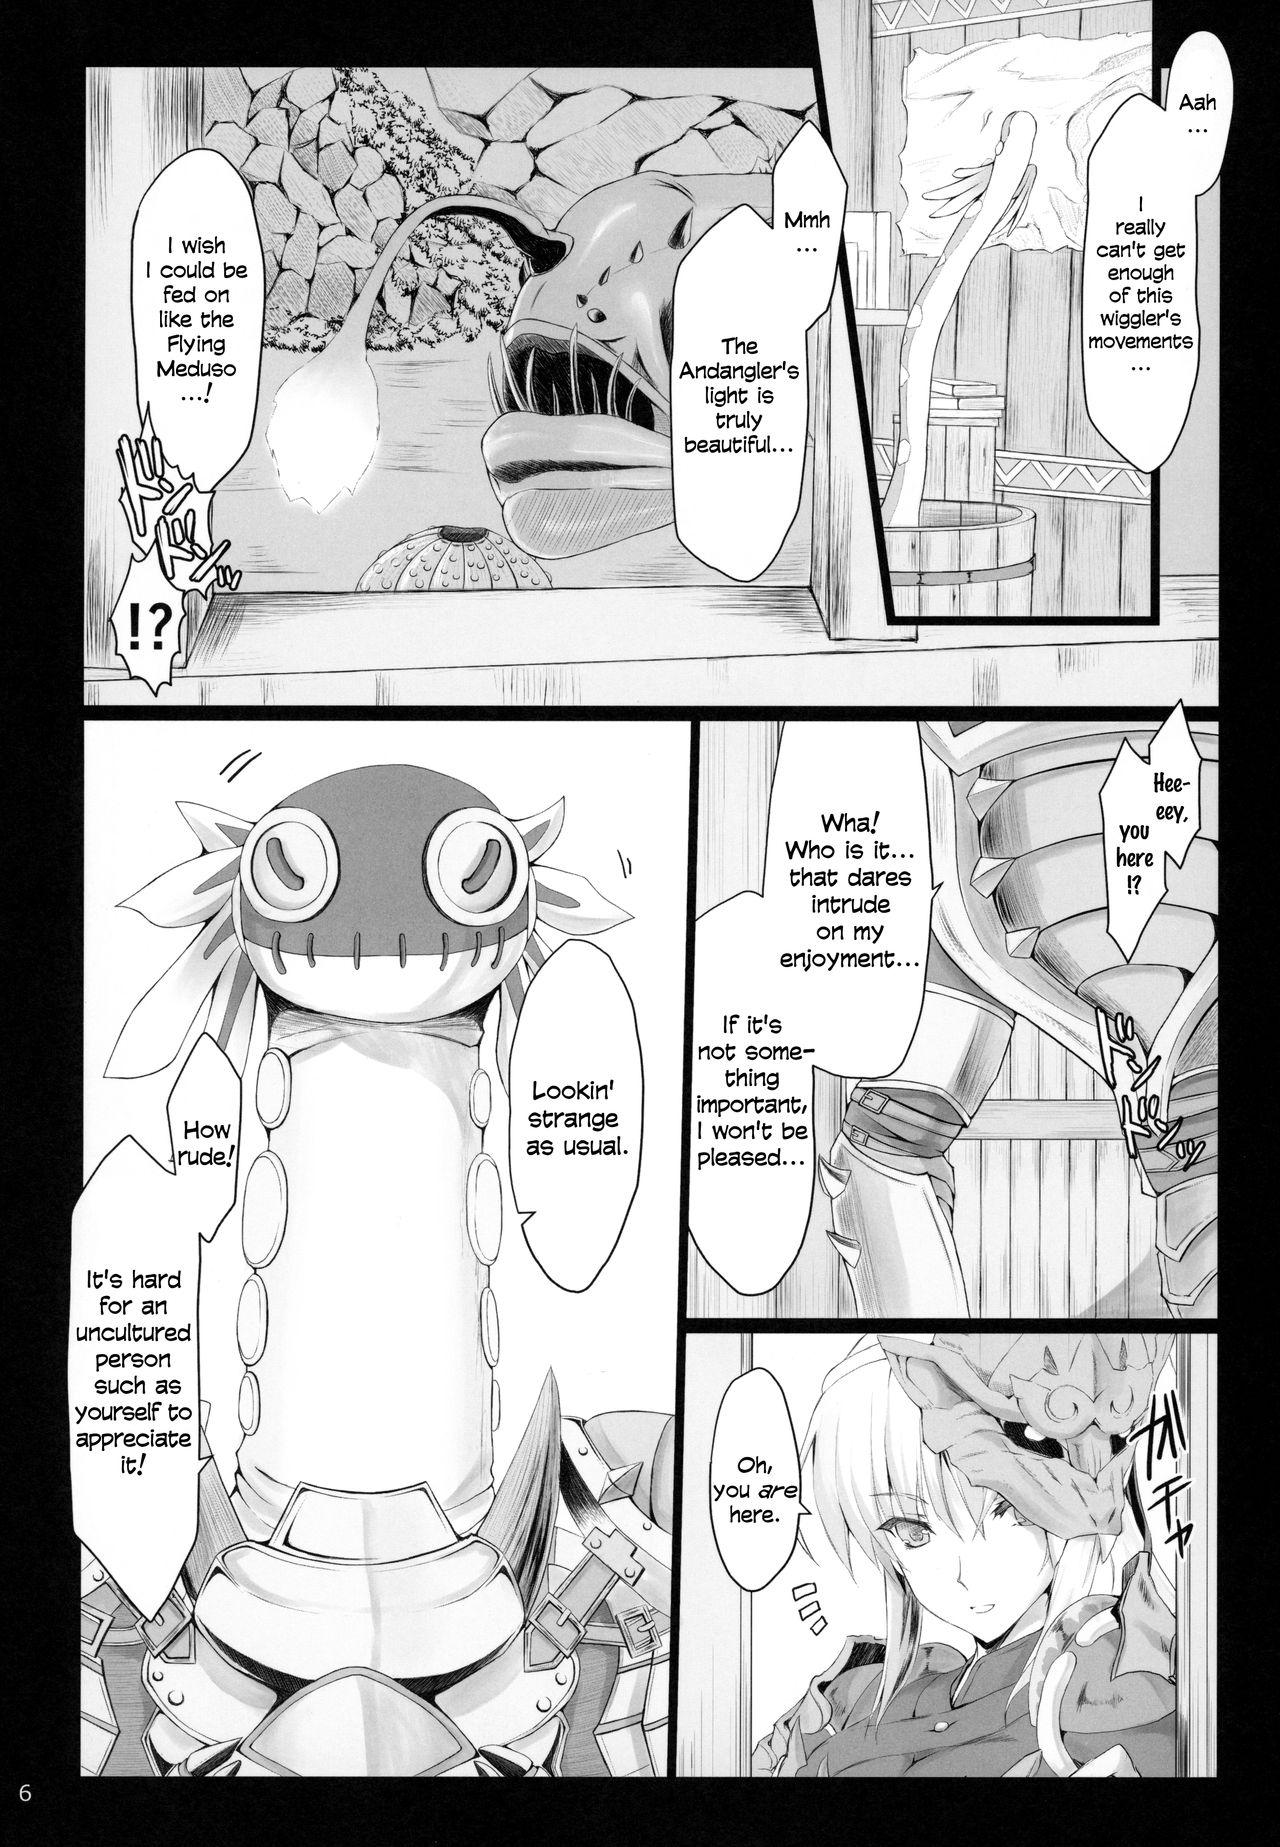 Best Blowjobs Ever MonHun no Erohon 16 - Monster hunter Tied - Page 5